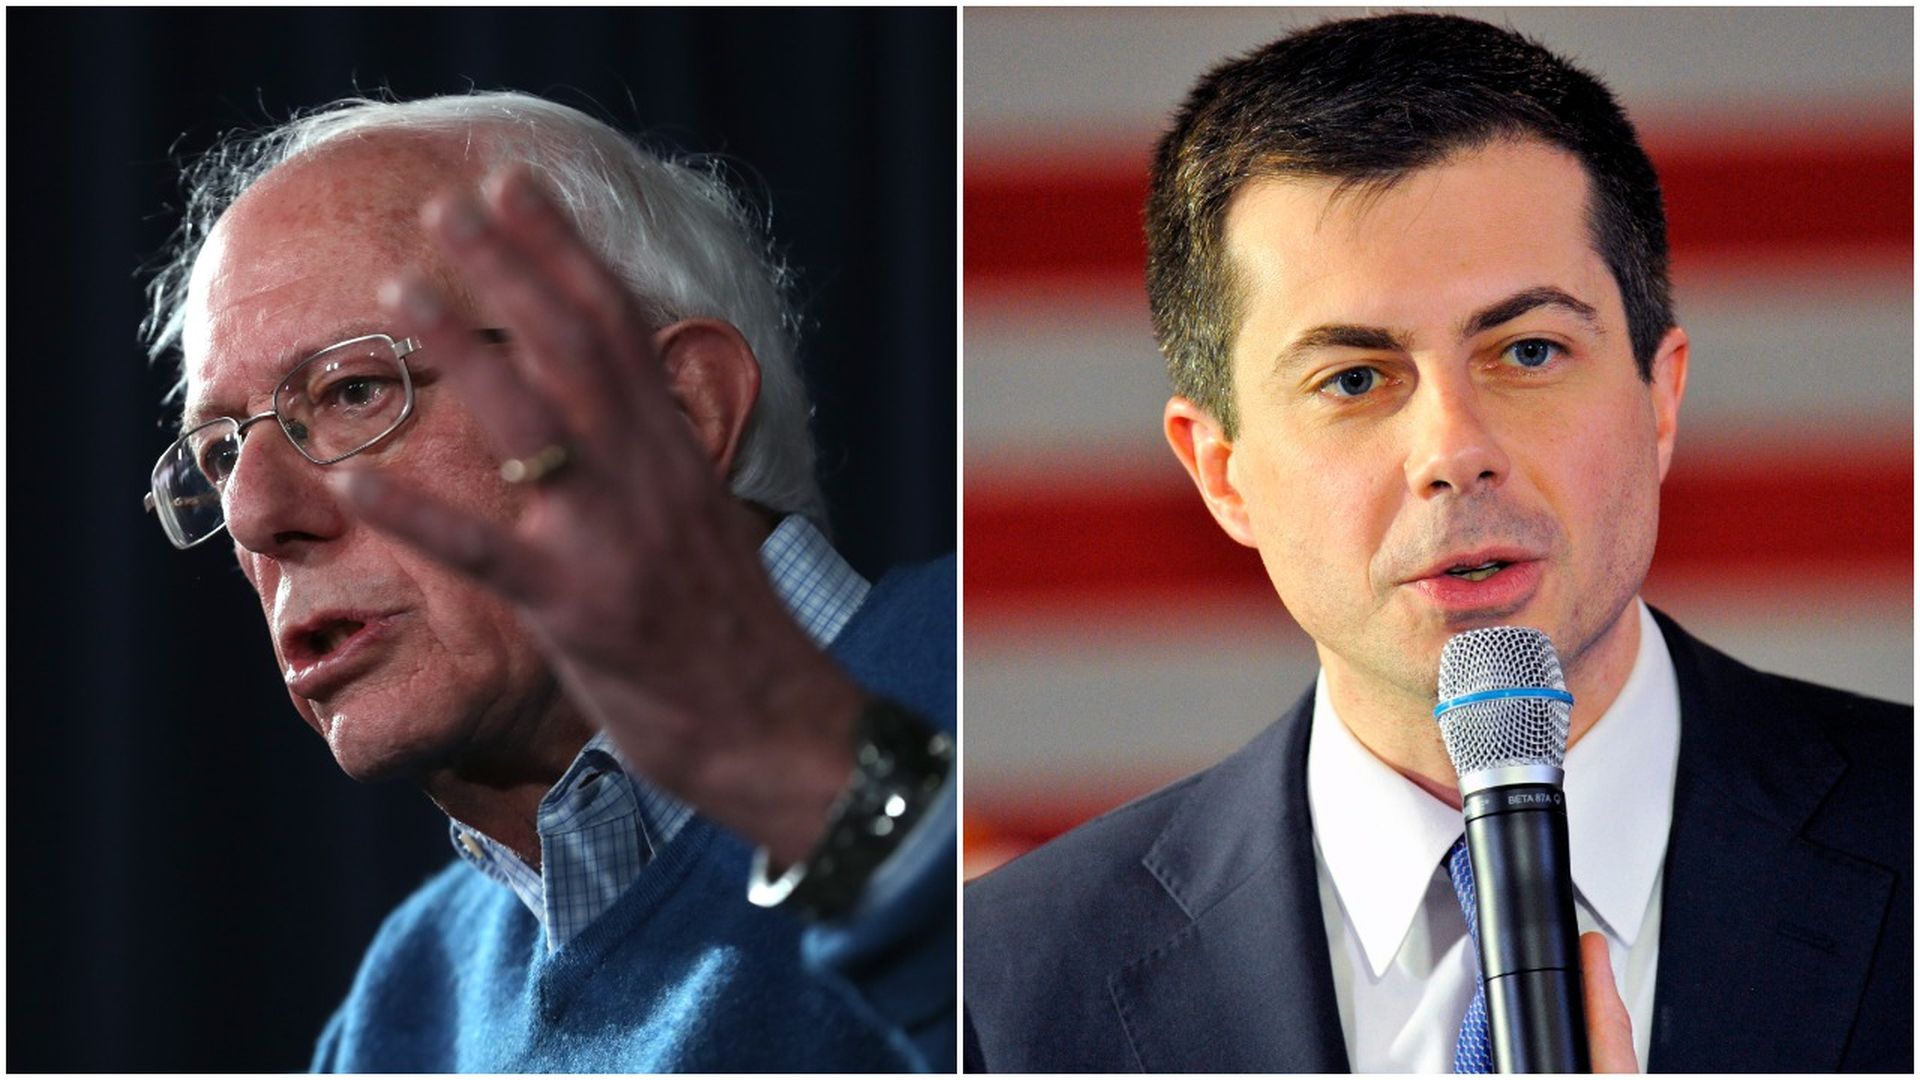 This image is a split screen of Bernie Sanders and Pete Buttigieg. 